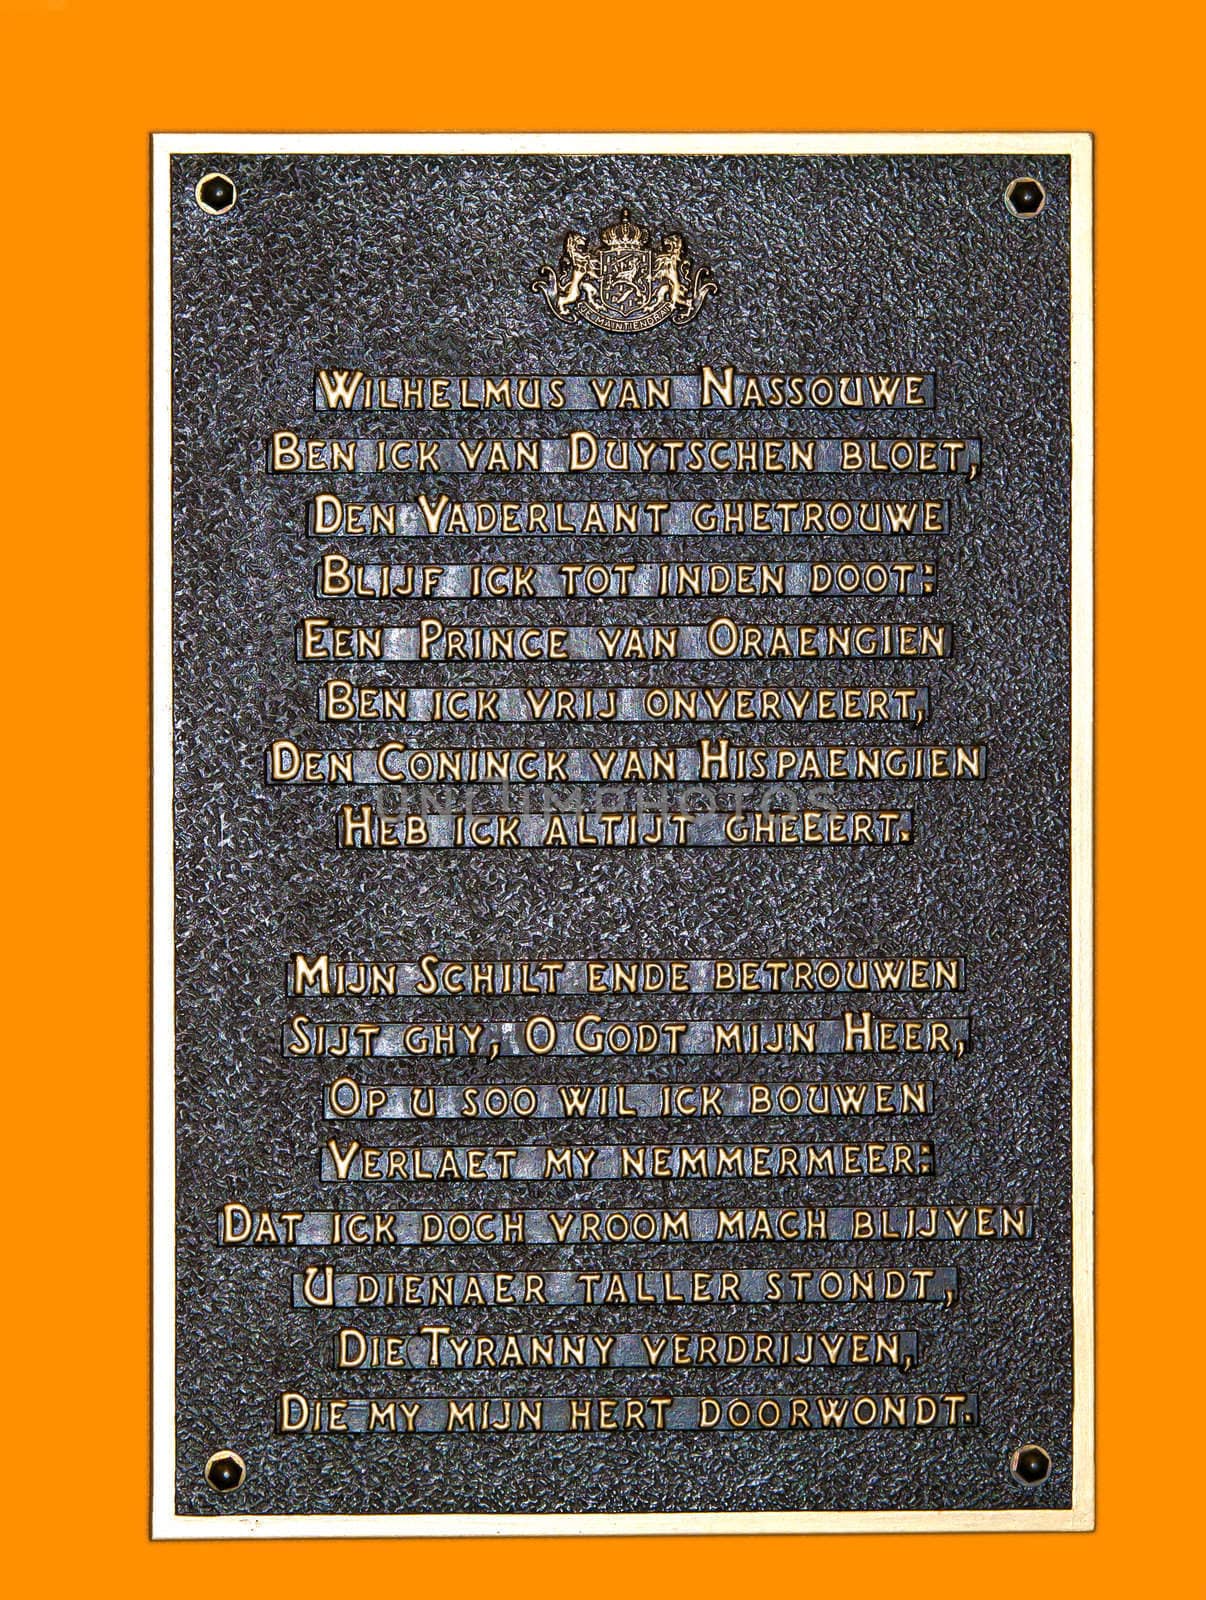 Dutch national anthem at an antique plate with an orange background by kees59